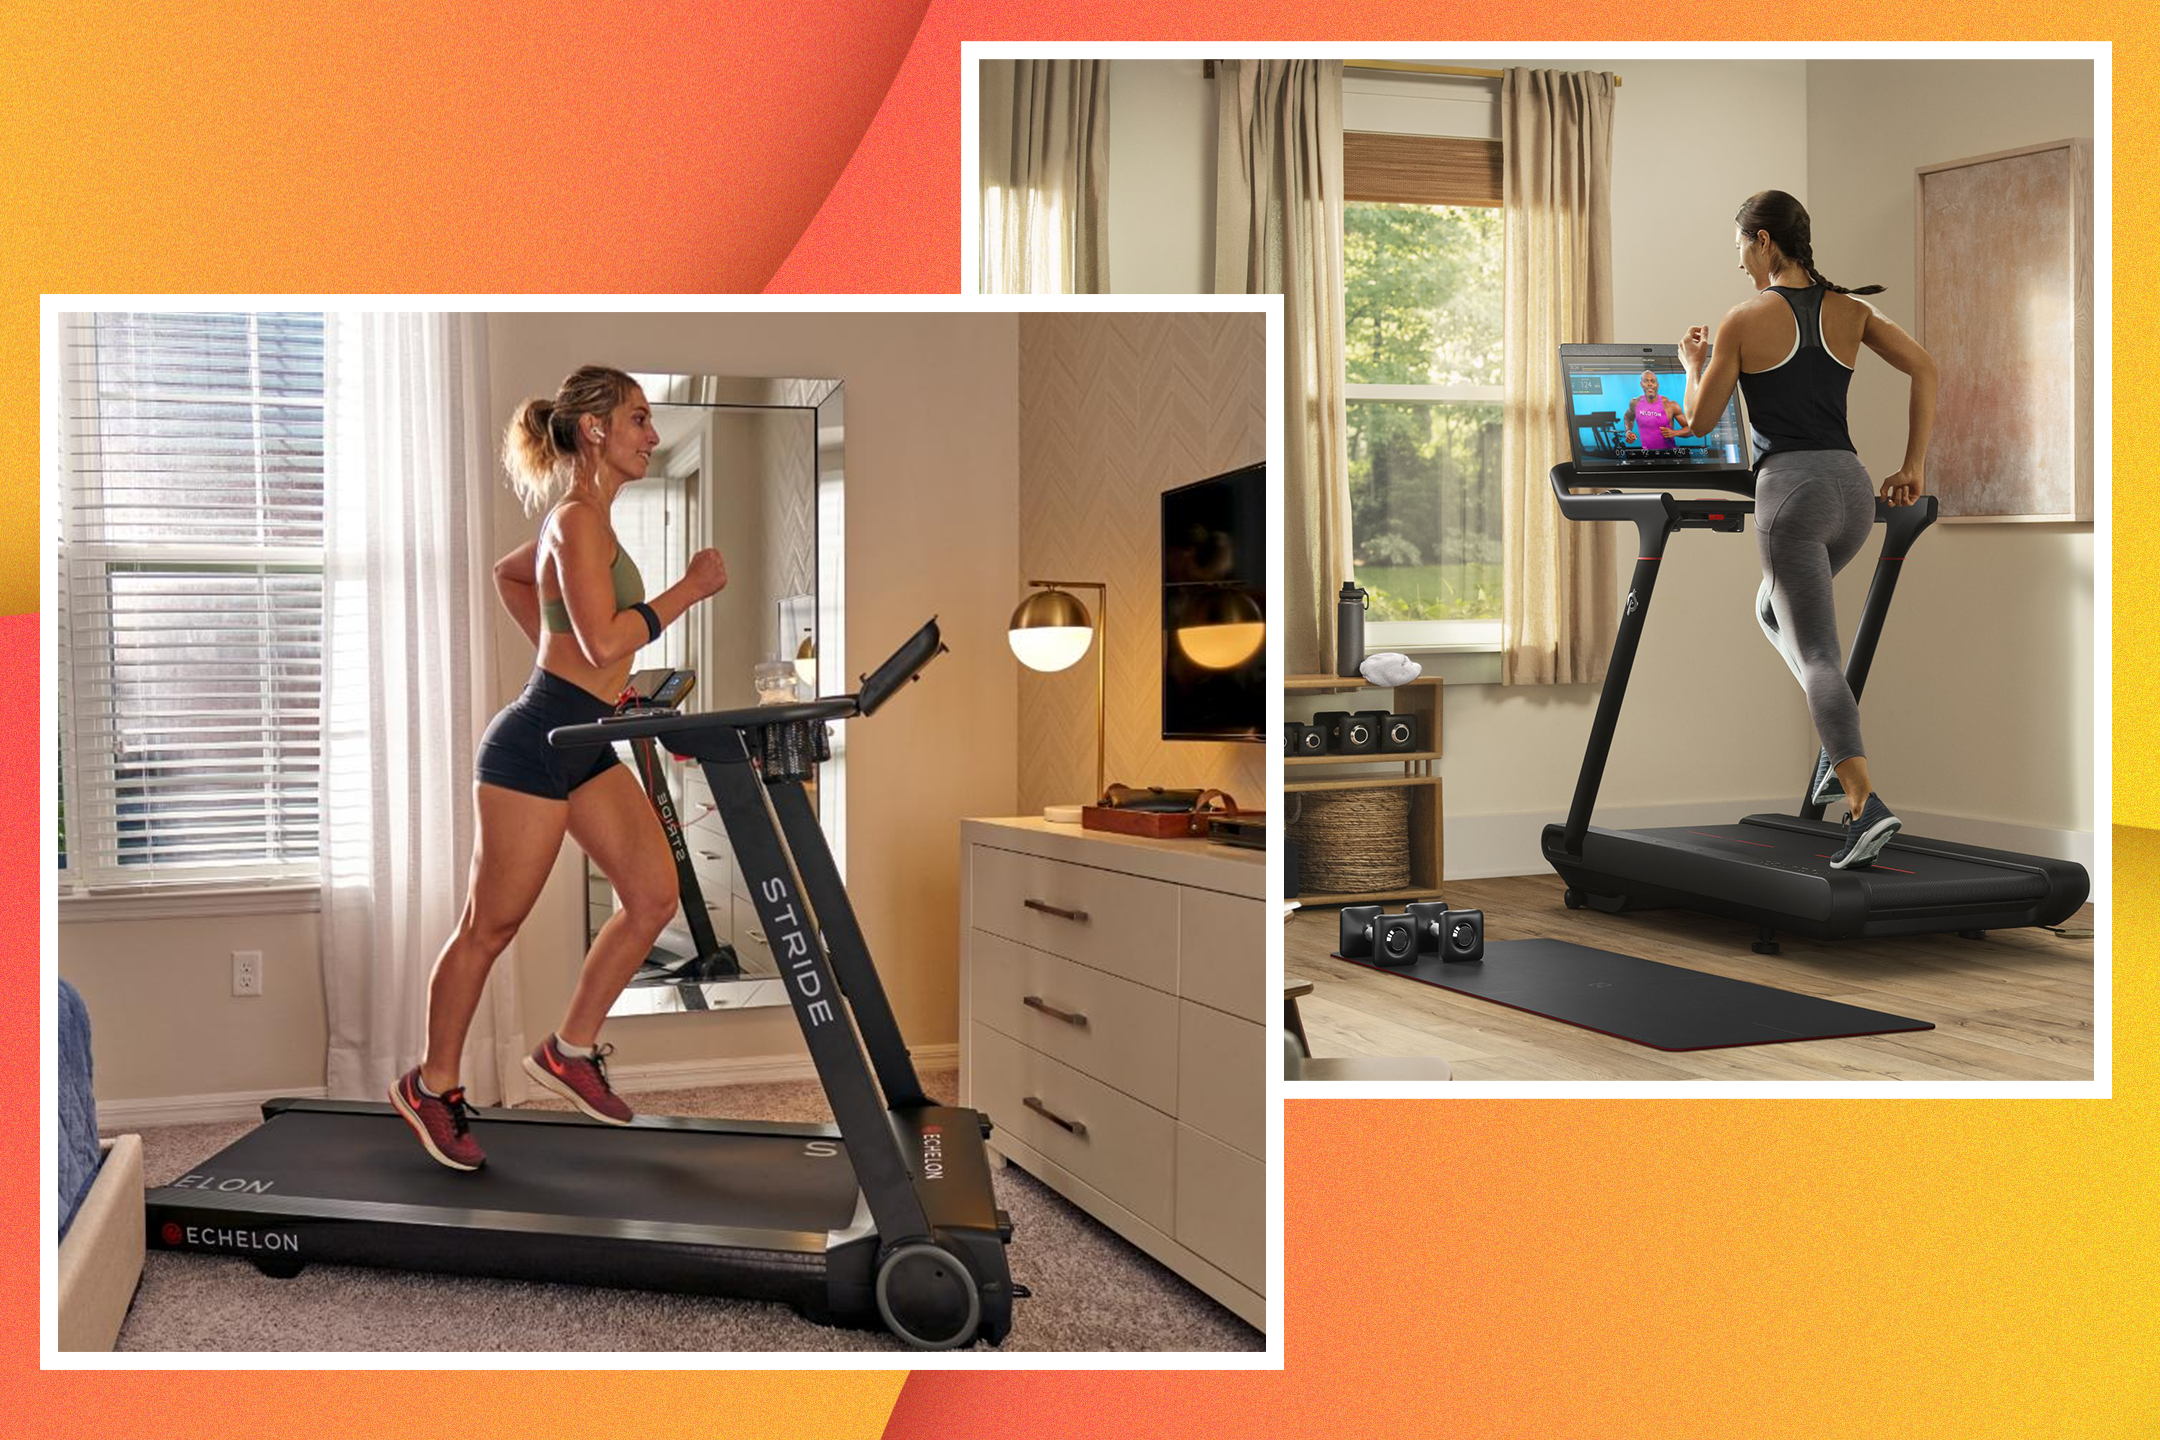 From all bells and whistles to fuss-free models, we put these treadmills through their paces